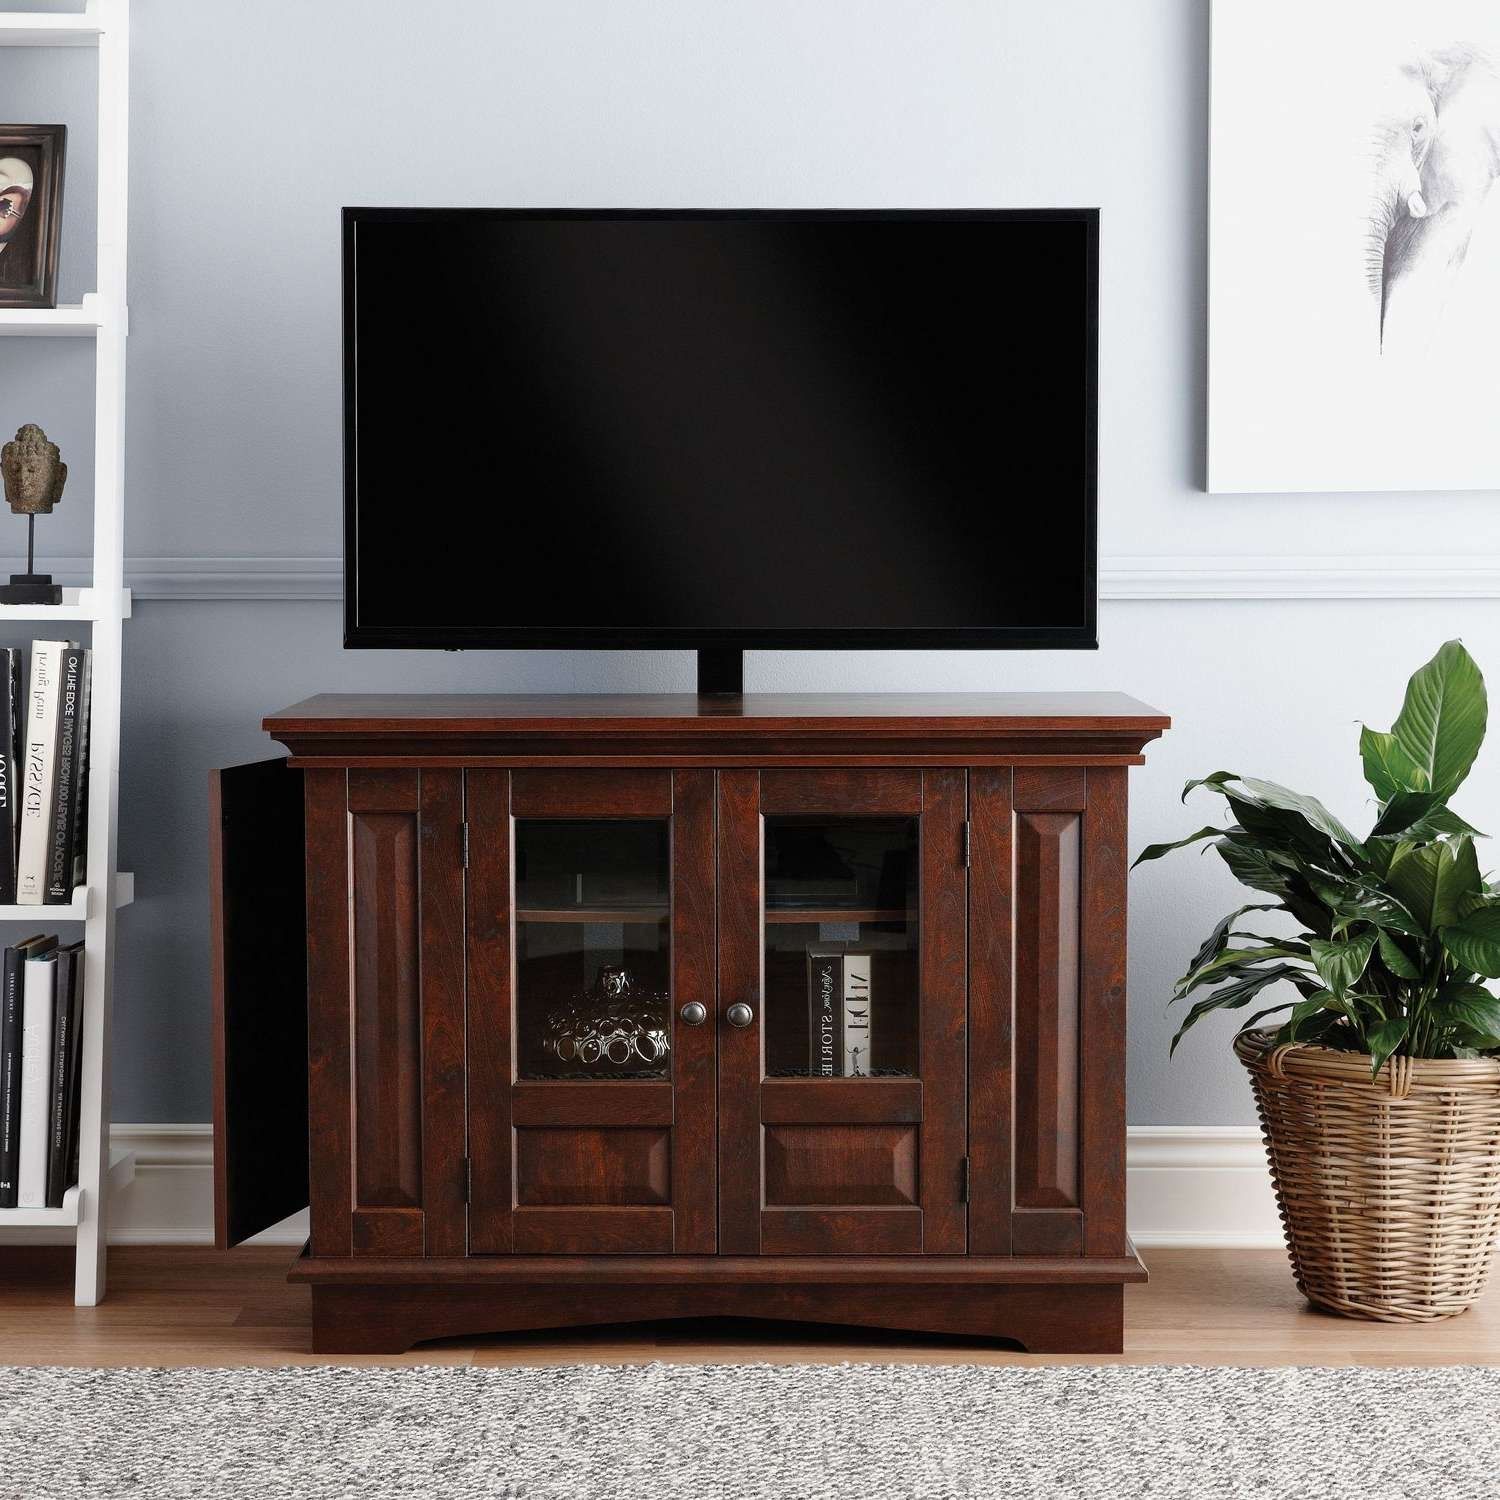 Universal Tv St& & Wall Mounts At Walmart Canada Within Tv Stands 38 Inches Wide (View 1 of 15)